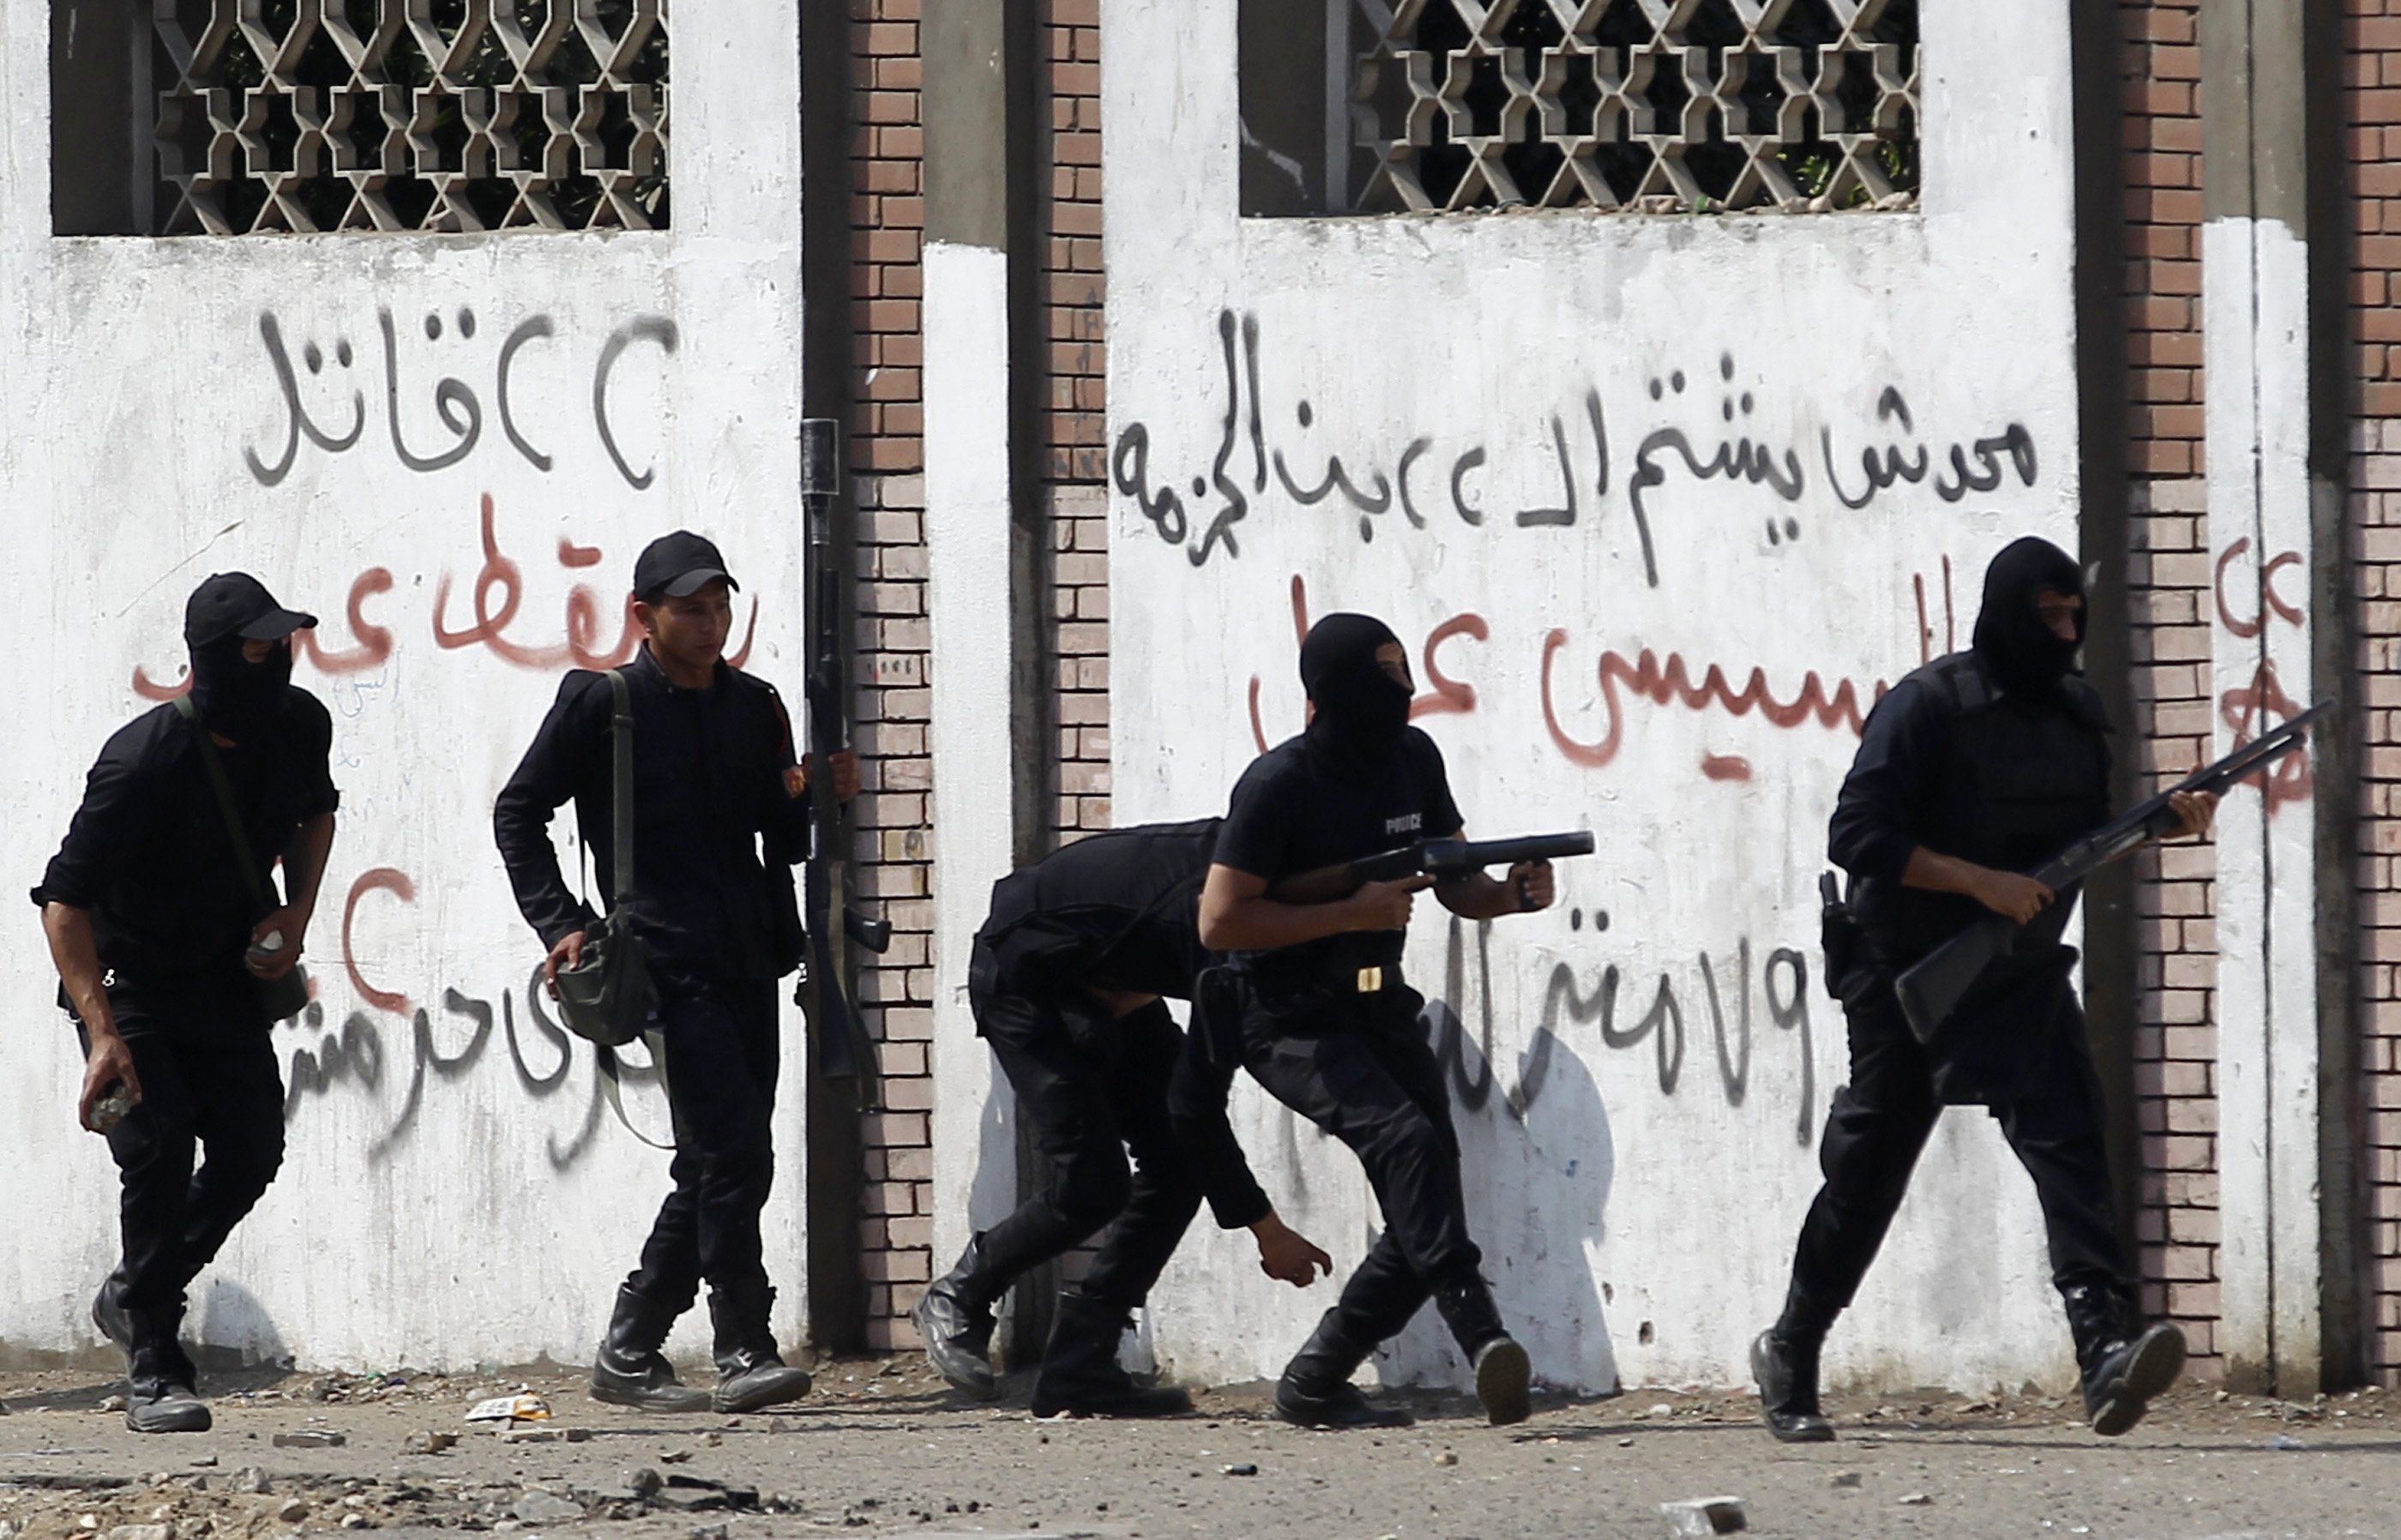 Students clash with forces near Ain Shams University